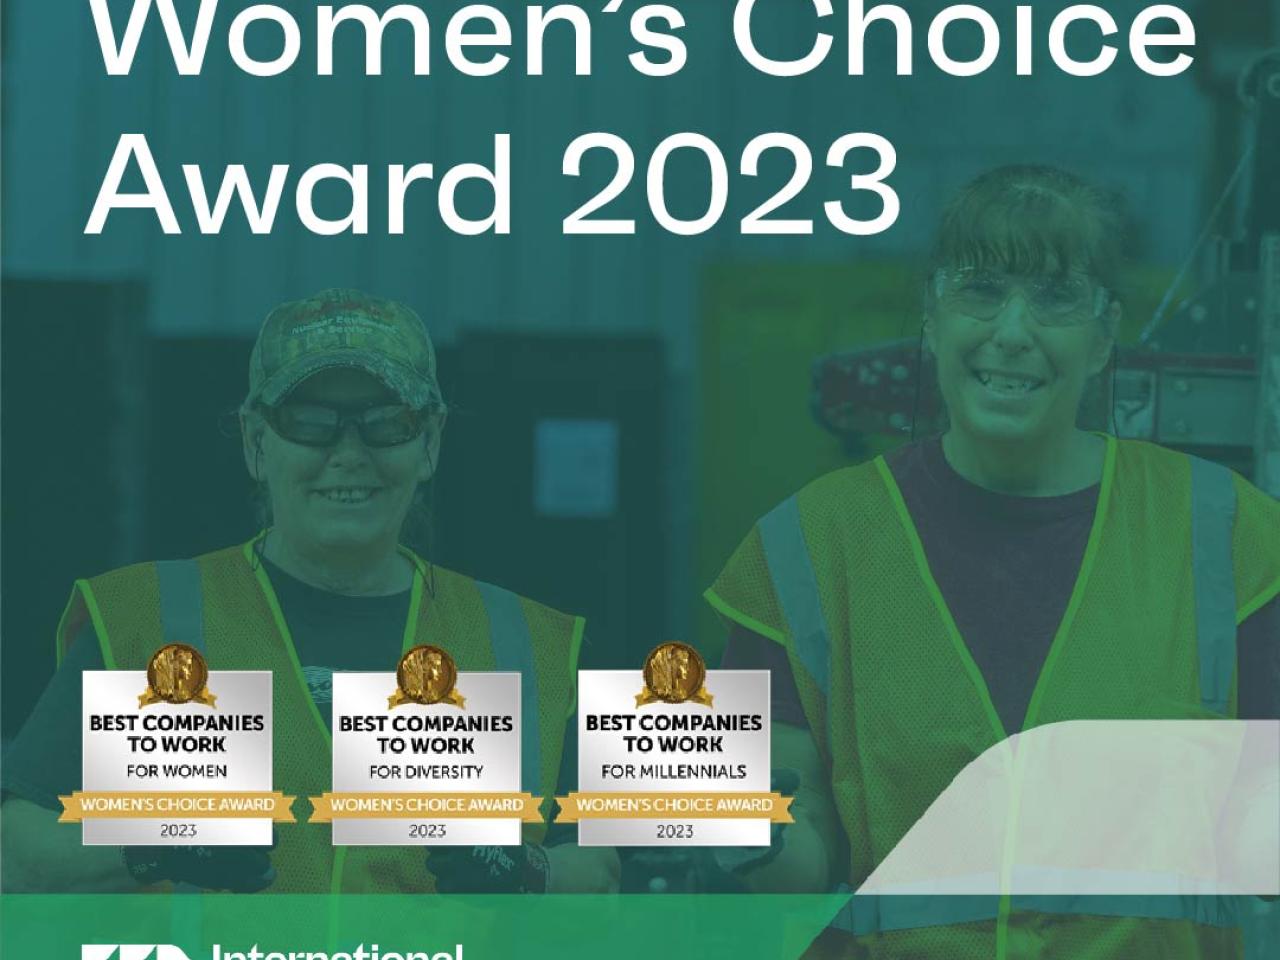 Women's Choice Award 2023 with International Paper logo and two people smiling